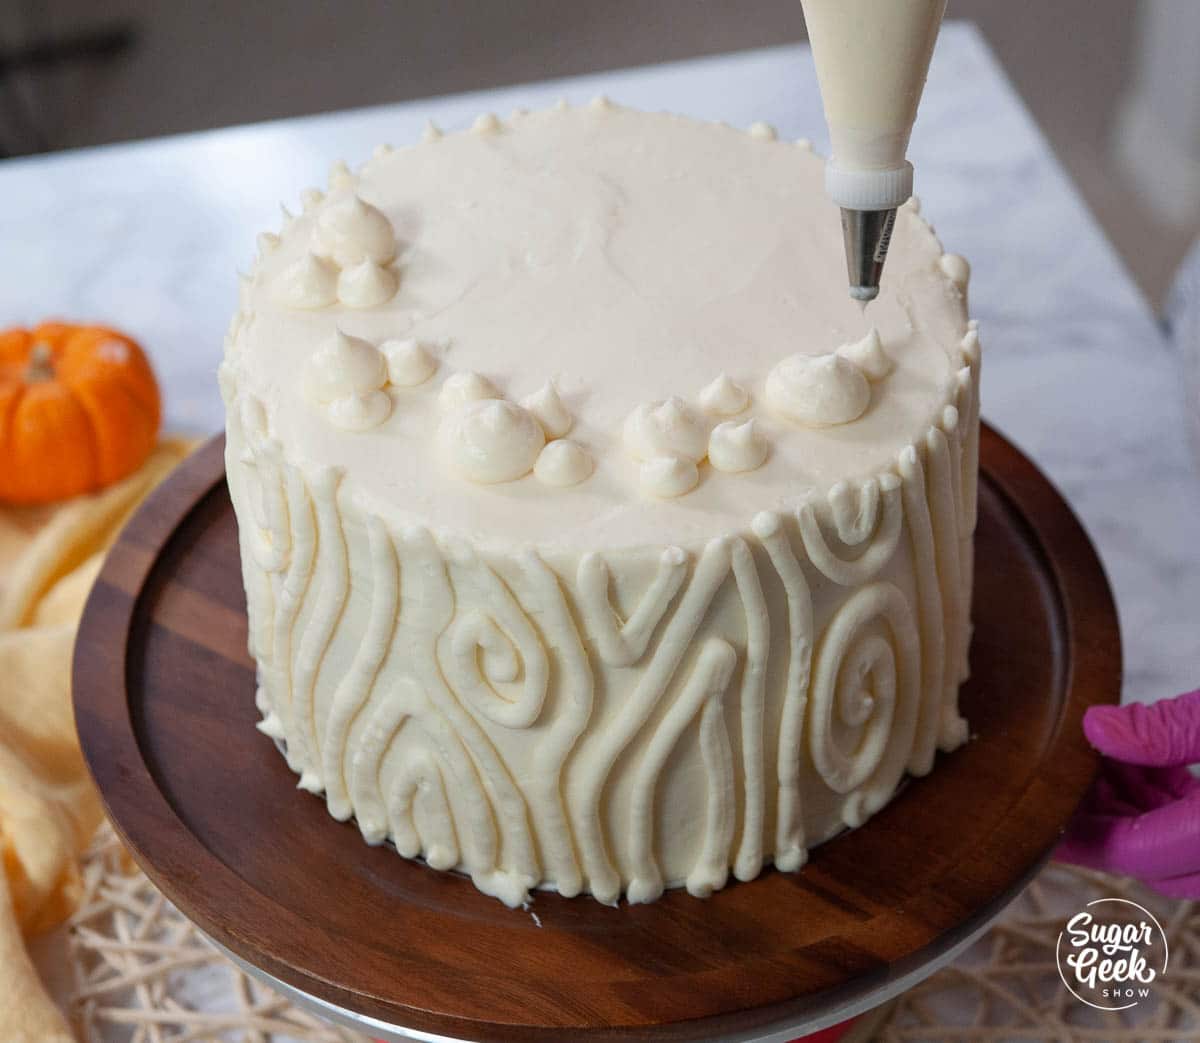 piping dollops of cream cheese frosting on top of the cake